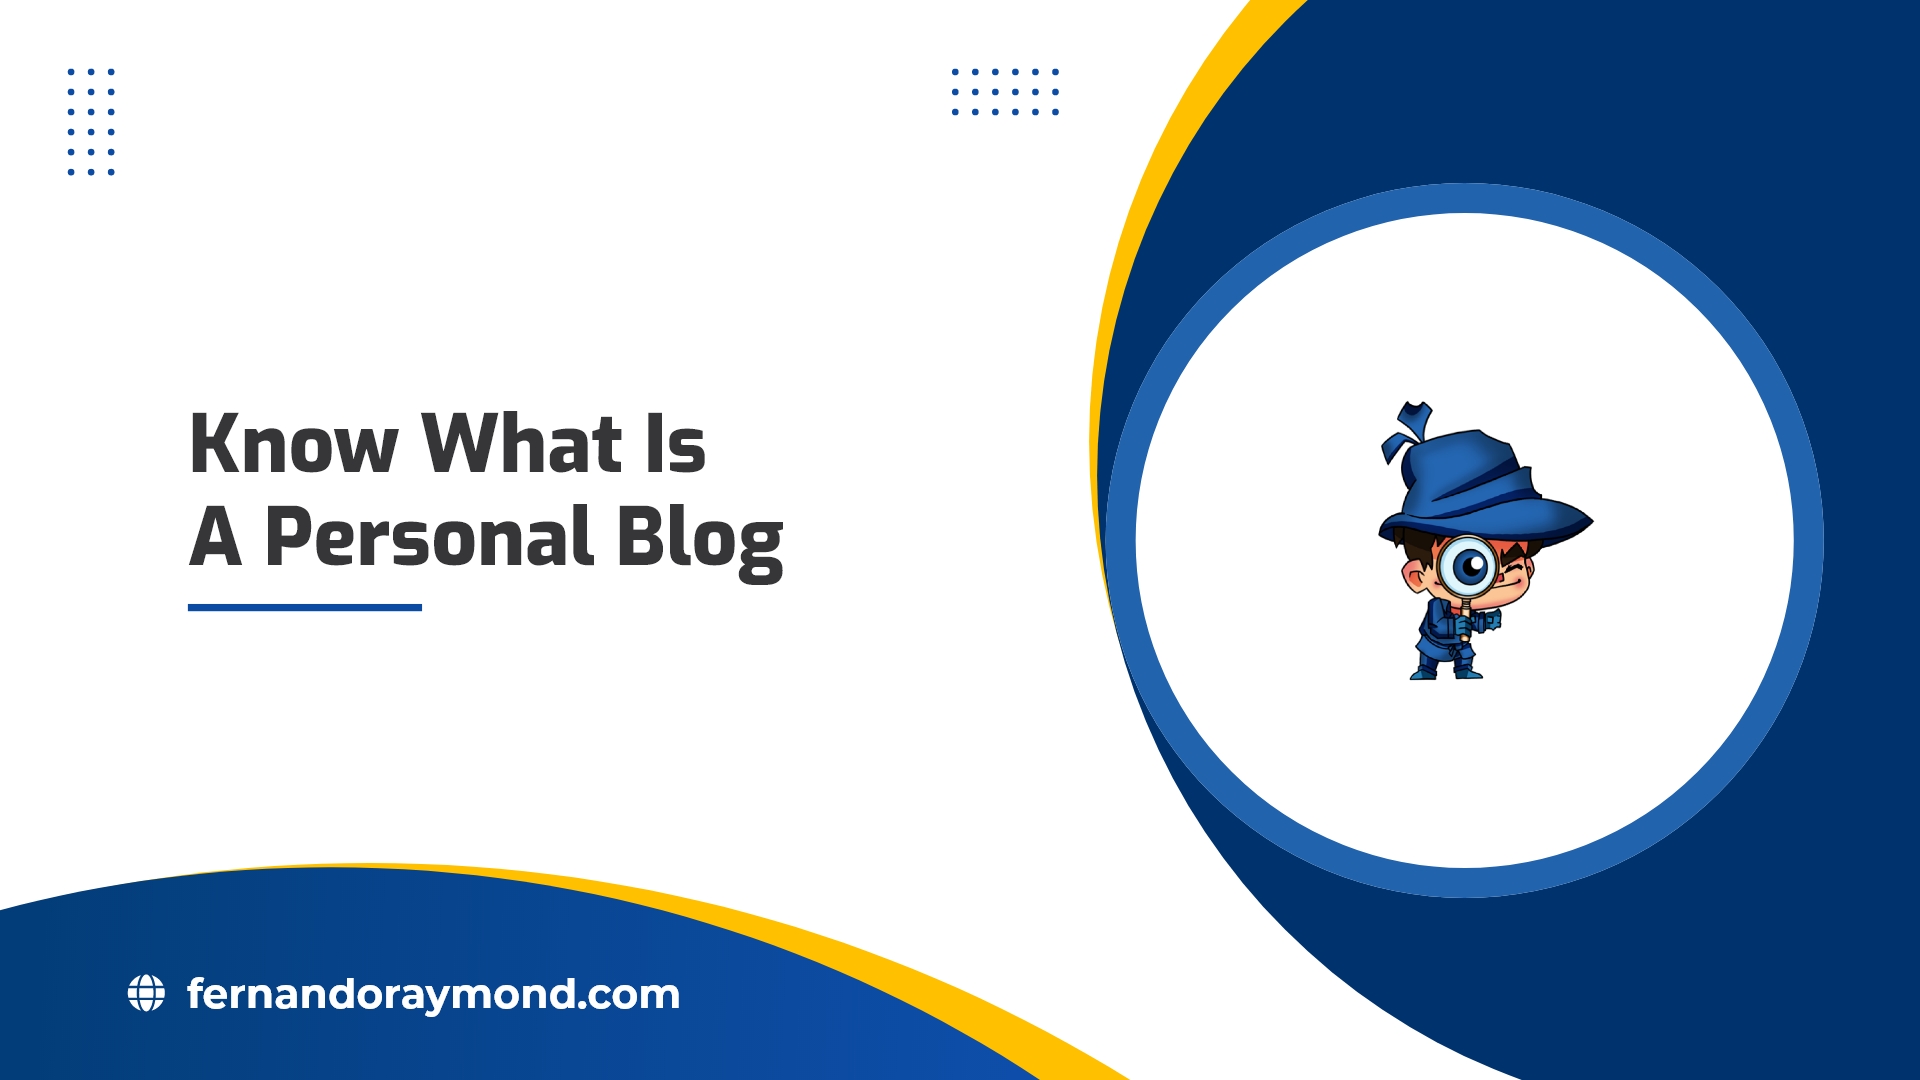 What is a Personal Blog meaning?